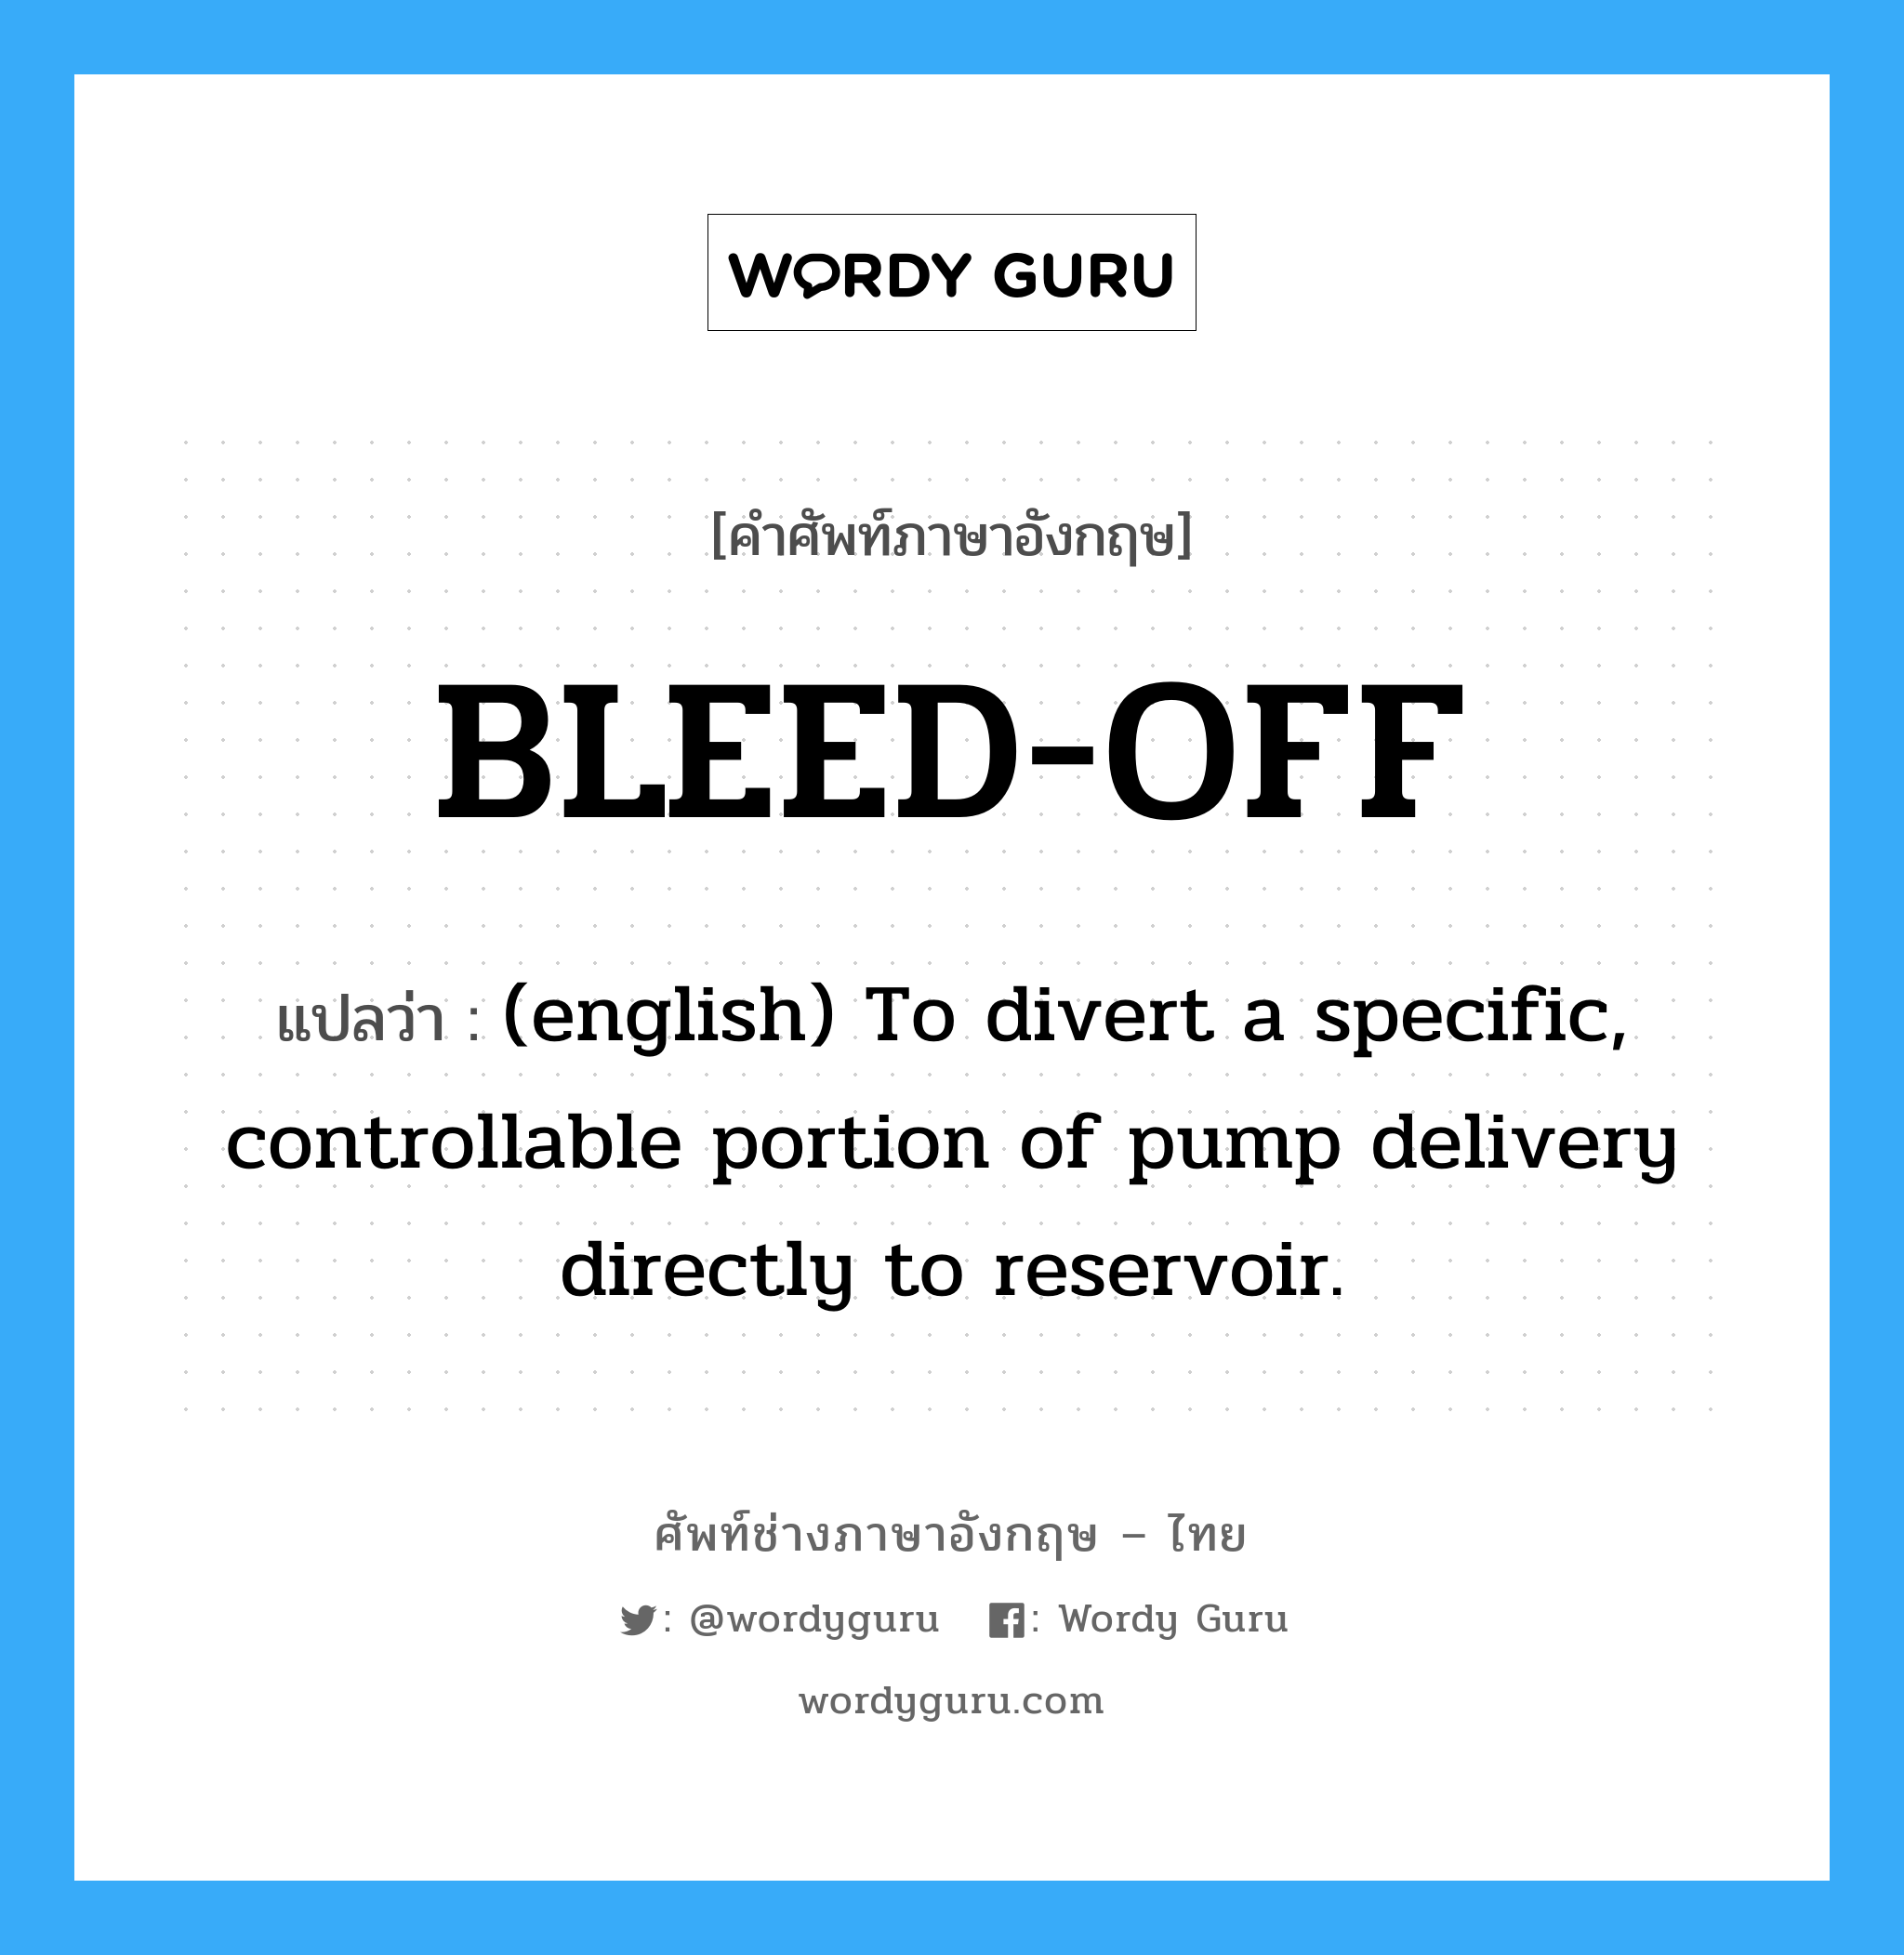 BLEED-OFF แปลว่า?, คำศัพท์ช่างภาษาอังกฤษ - ไทย BLEED-OFF คำศัพท์ภาษาอังกฤษ BLEED-OFF แปลว่า (english) To divert a specific, controllable portion of pump delivery directly to reservoir.